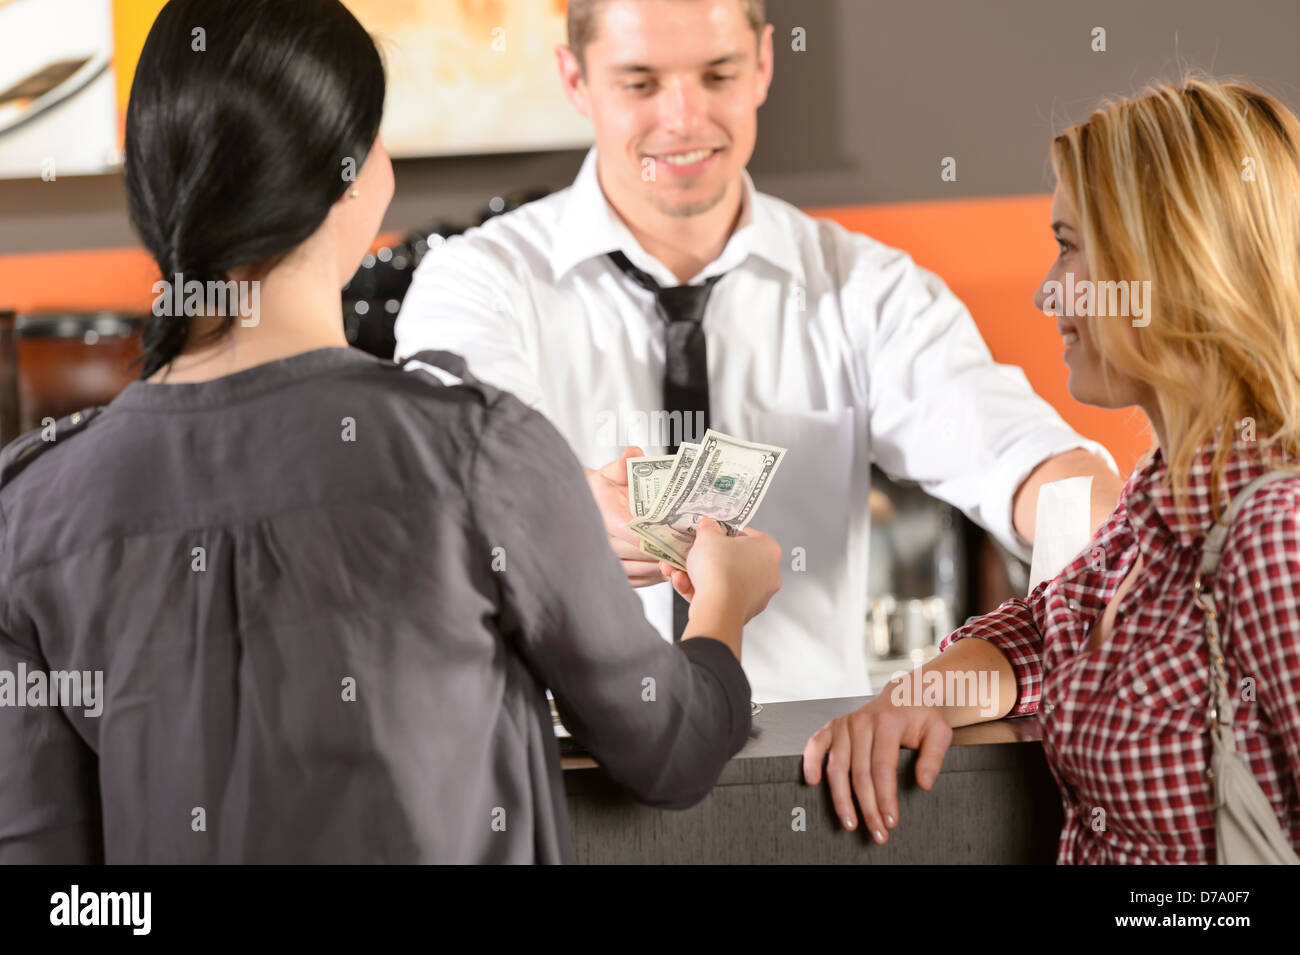 Female customers paying by cash dollar in bar to bartender Stock Photo